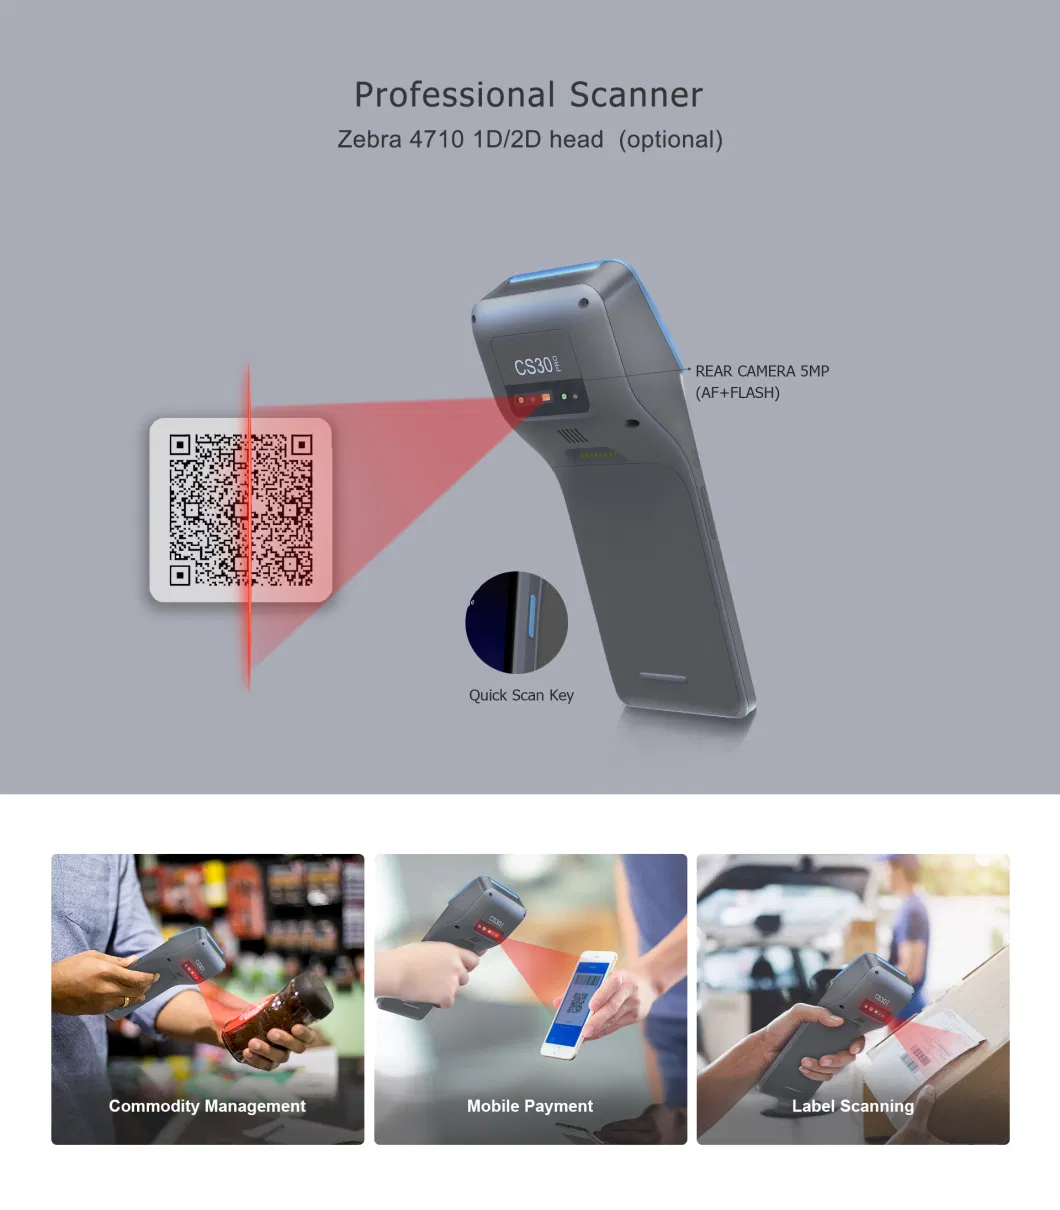 6.0 Inch Ultrathin Thermal Printer LCD Screen Handheld POS Terminal with GPS in China